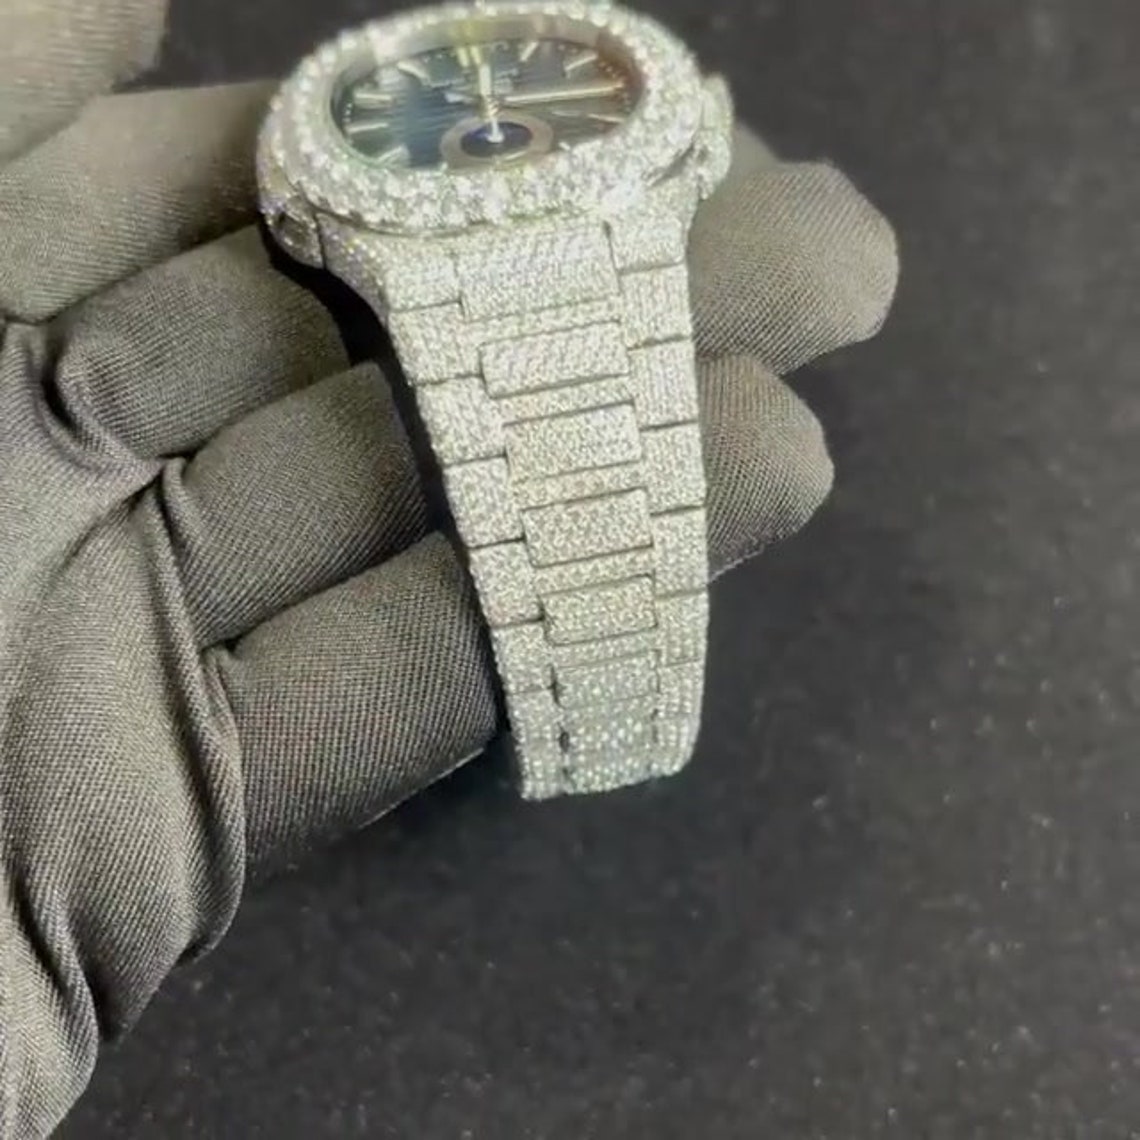 Moissanite Studded Diamond Watch Men Iced Out D Colorless | Etsy